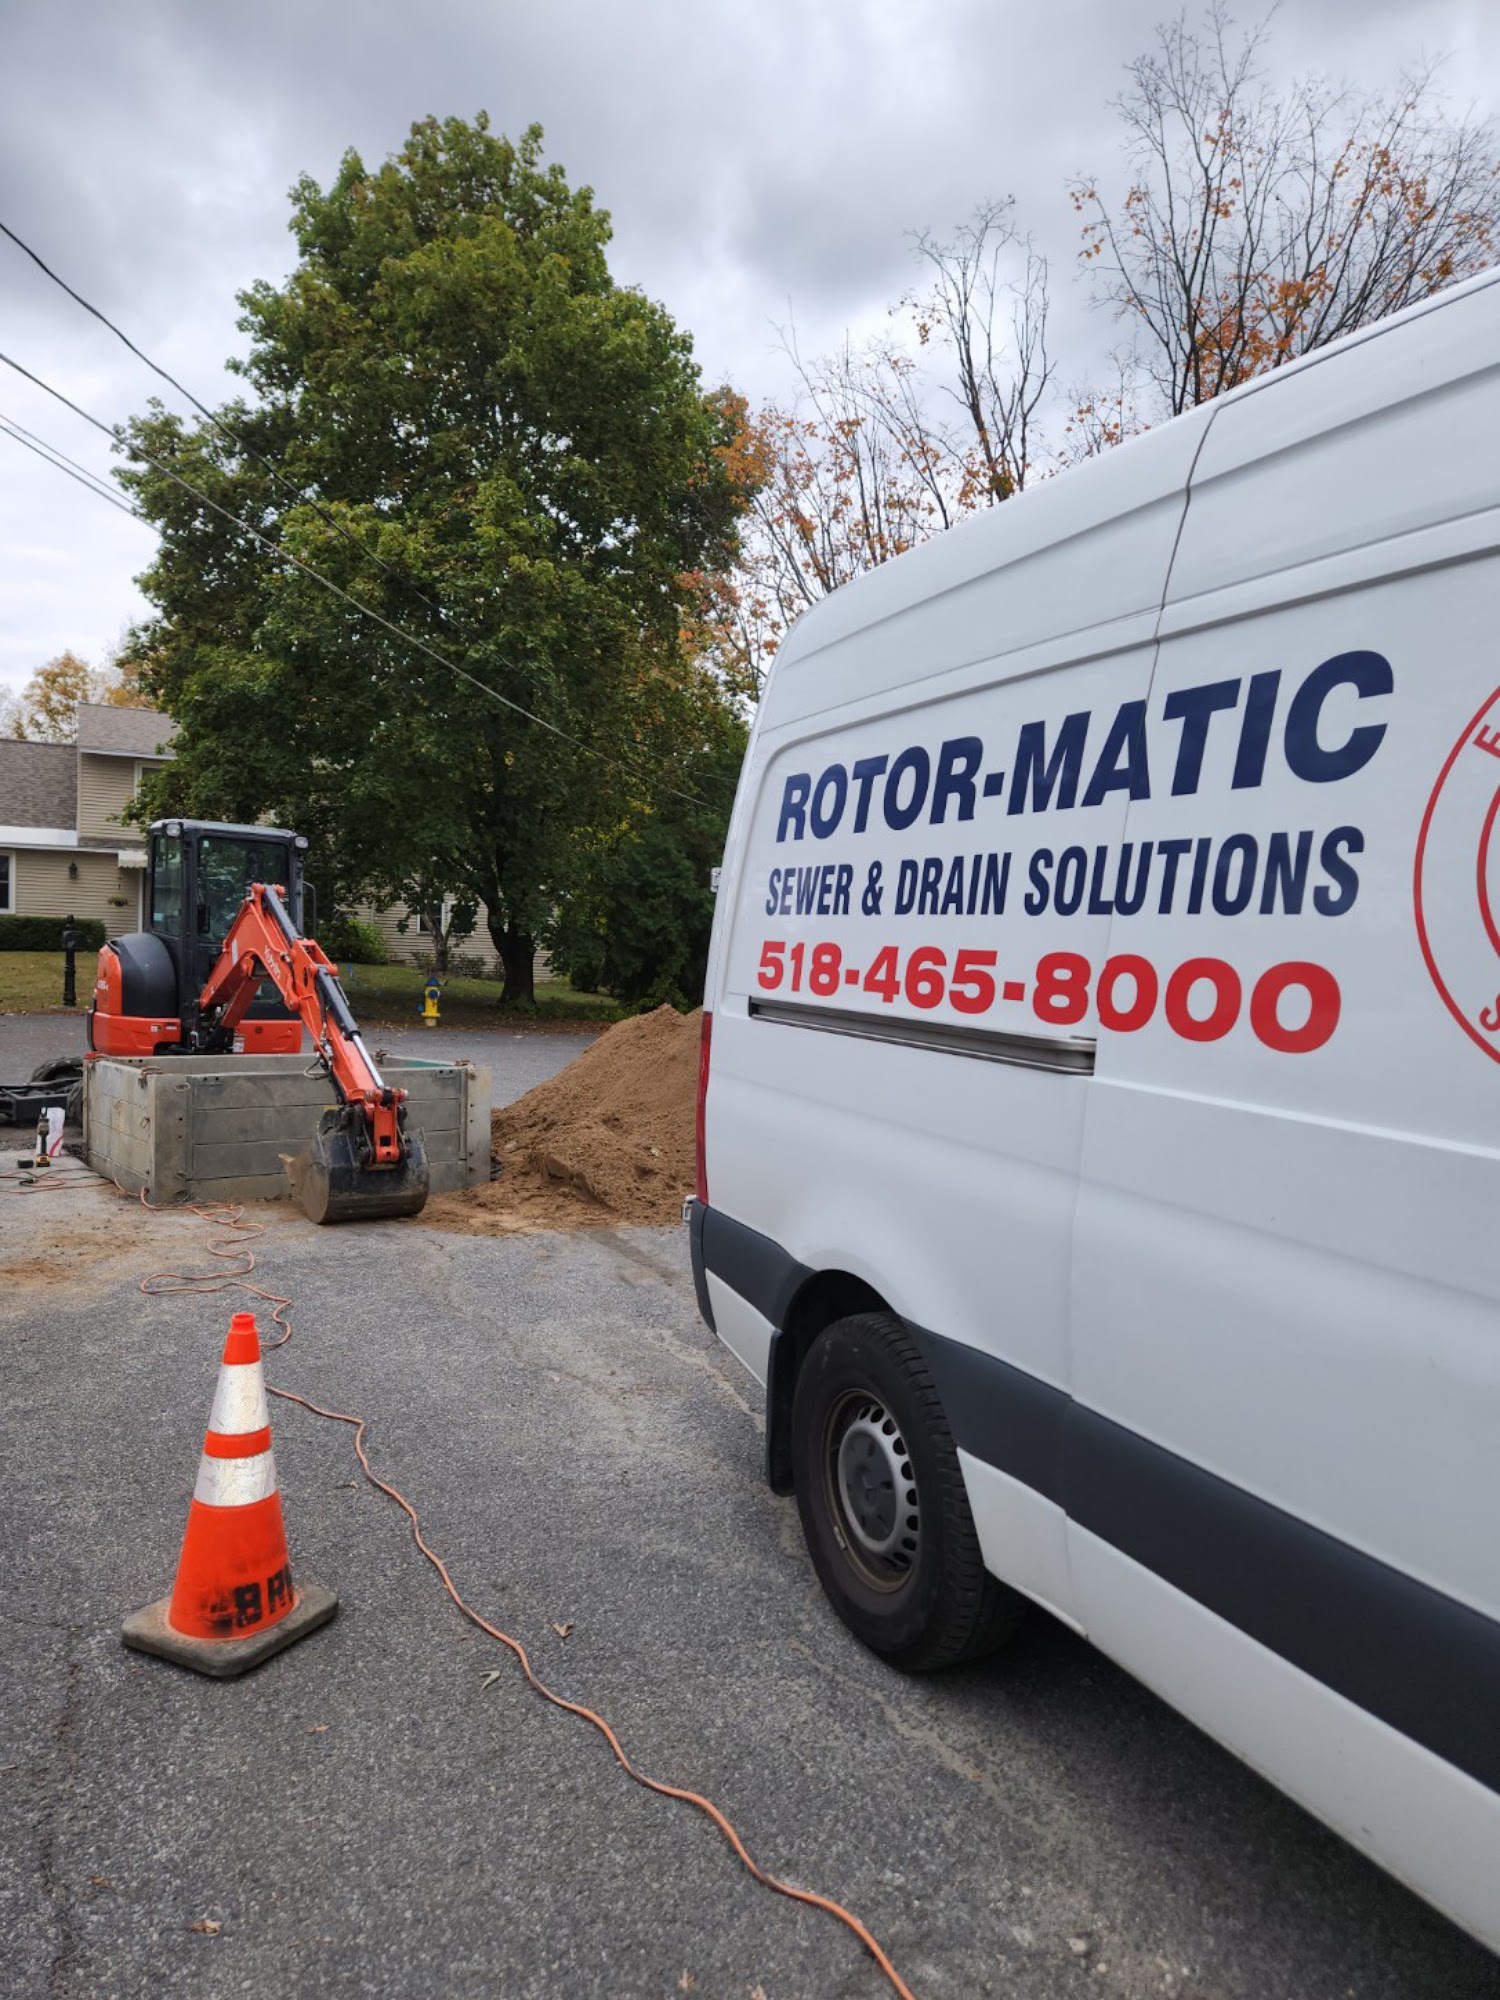 Rotor-Matic Sewer & Drain Solutions - Drain Cleaning 720 4th St, Watervliet New York 12189